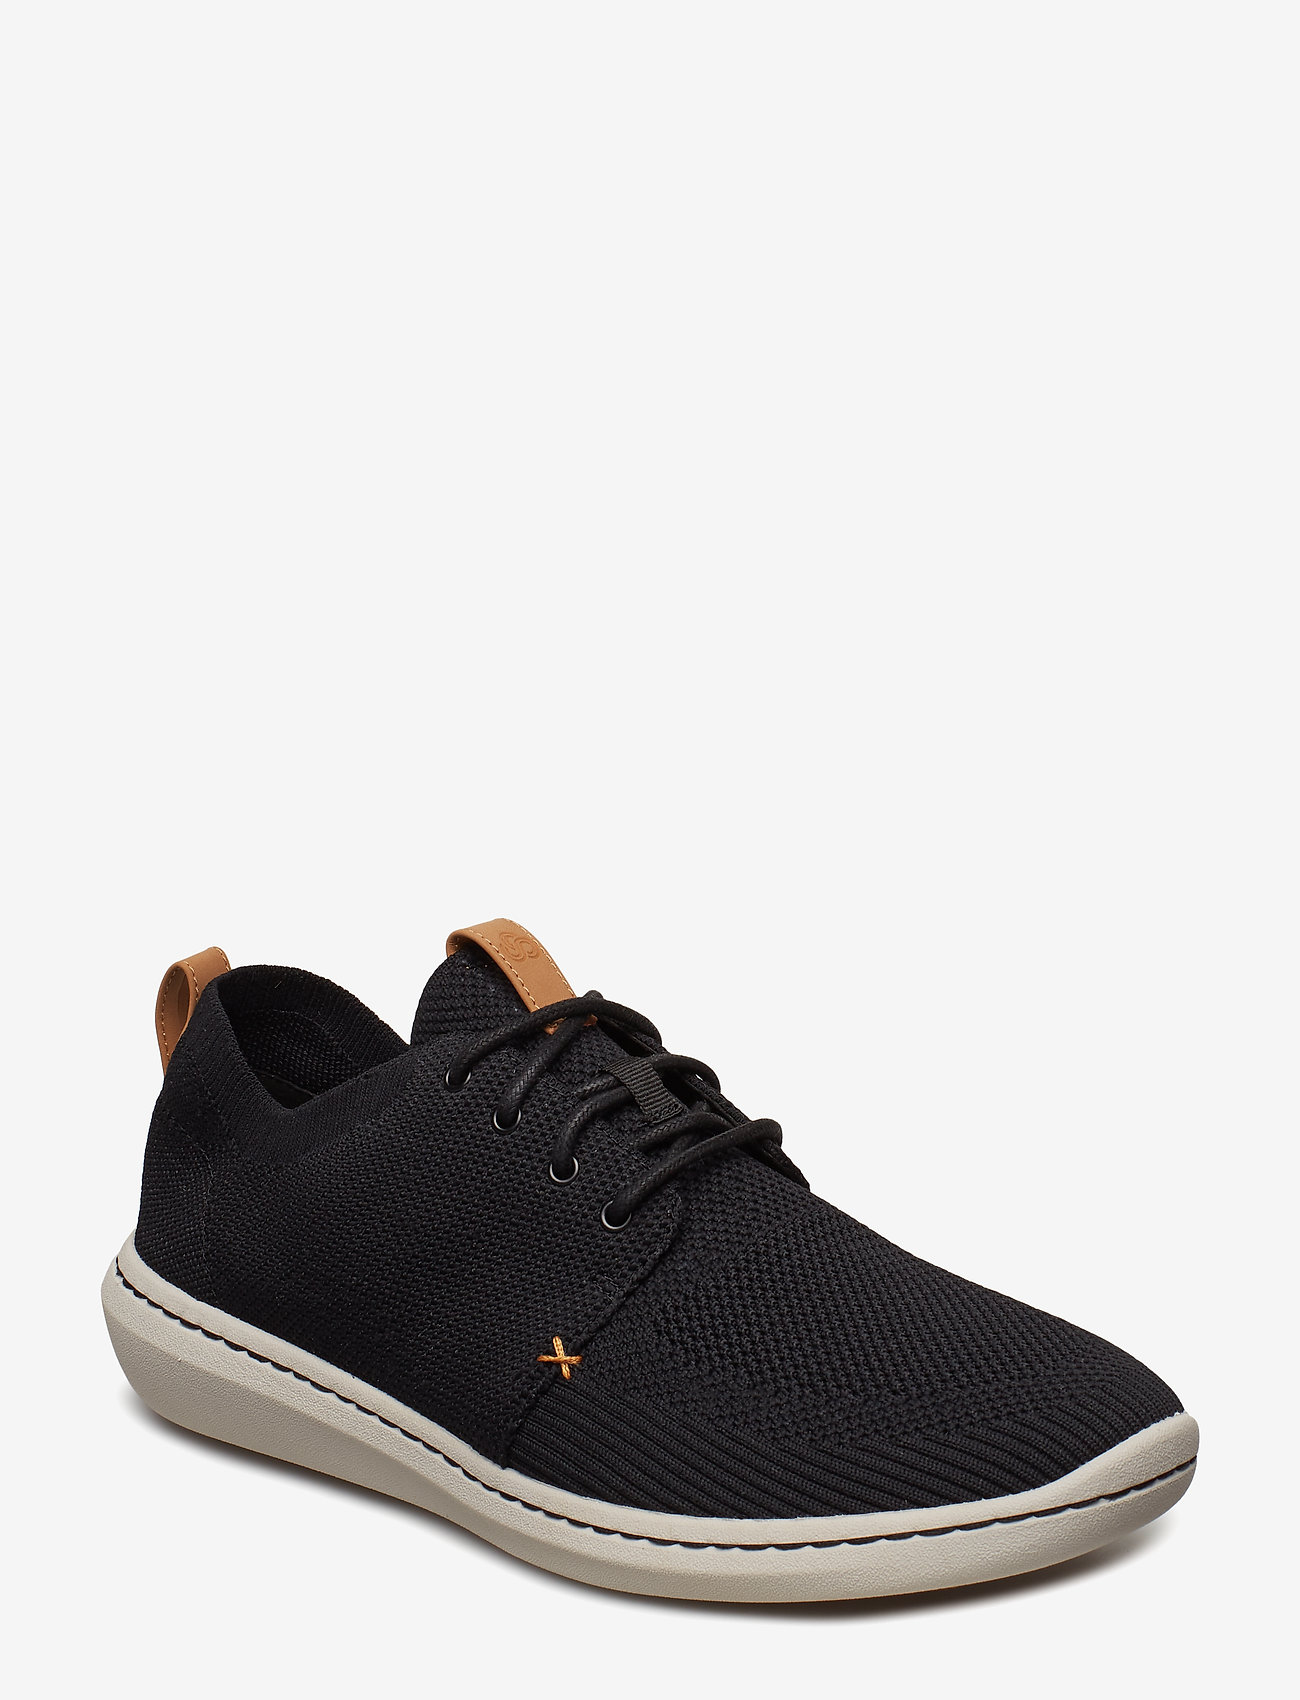 Clarks - Step Urban Mix G - lave sneakers - 1001 black - 0